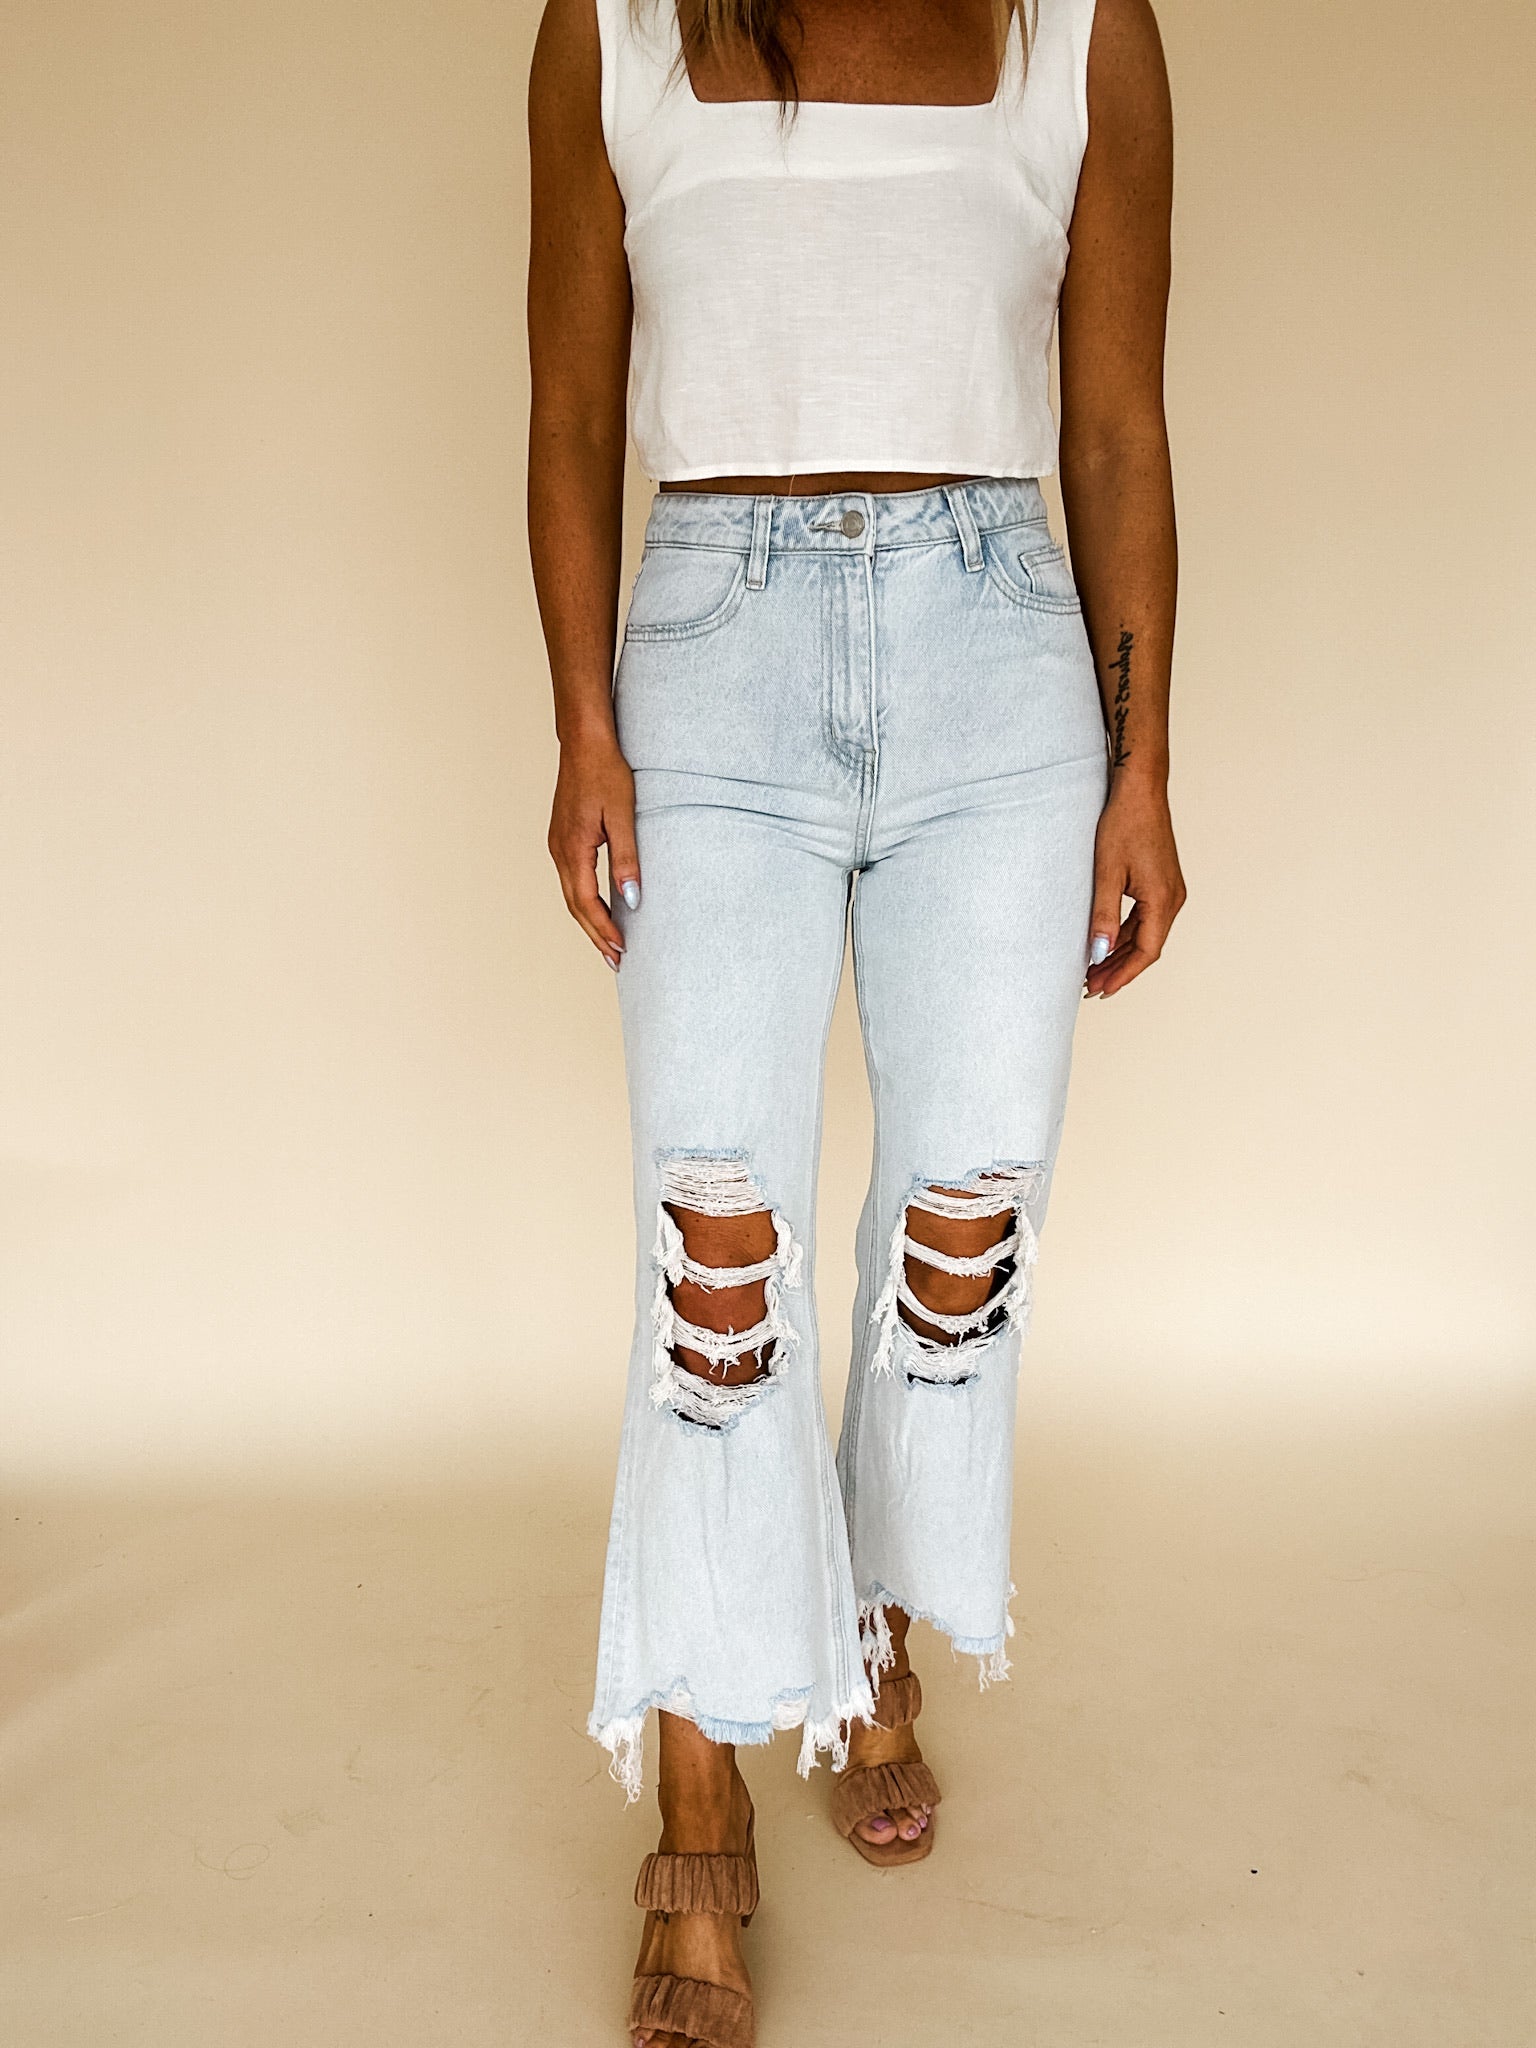 The Harlow Jean